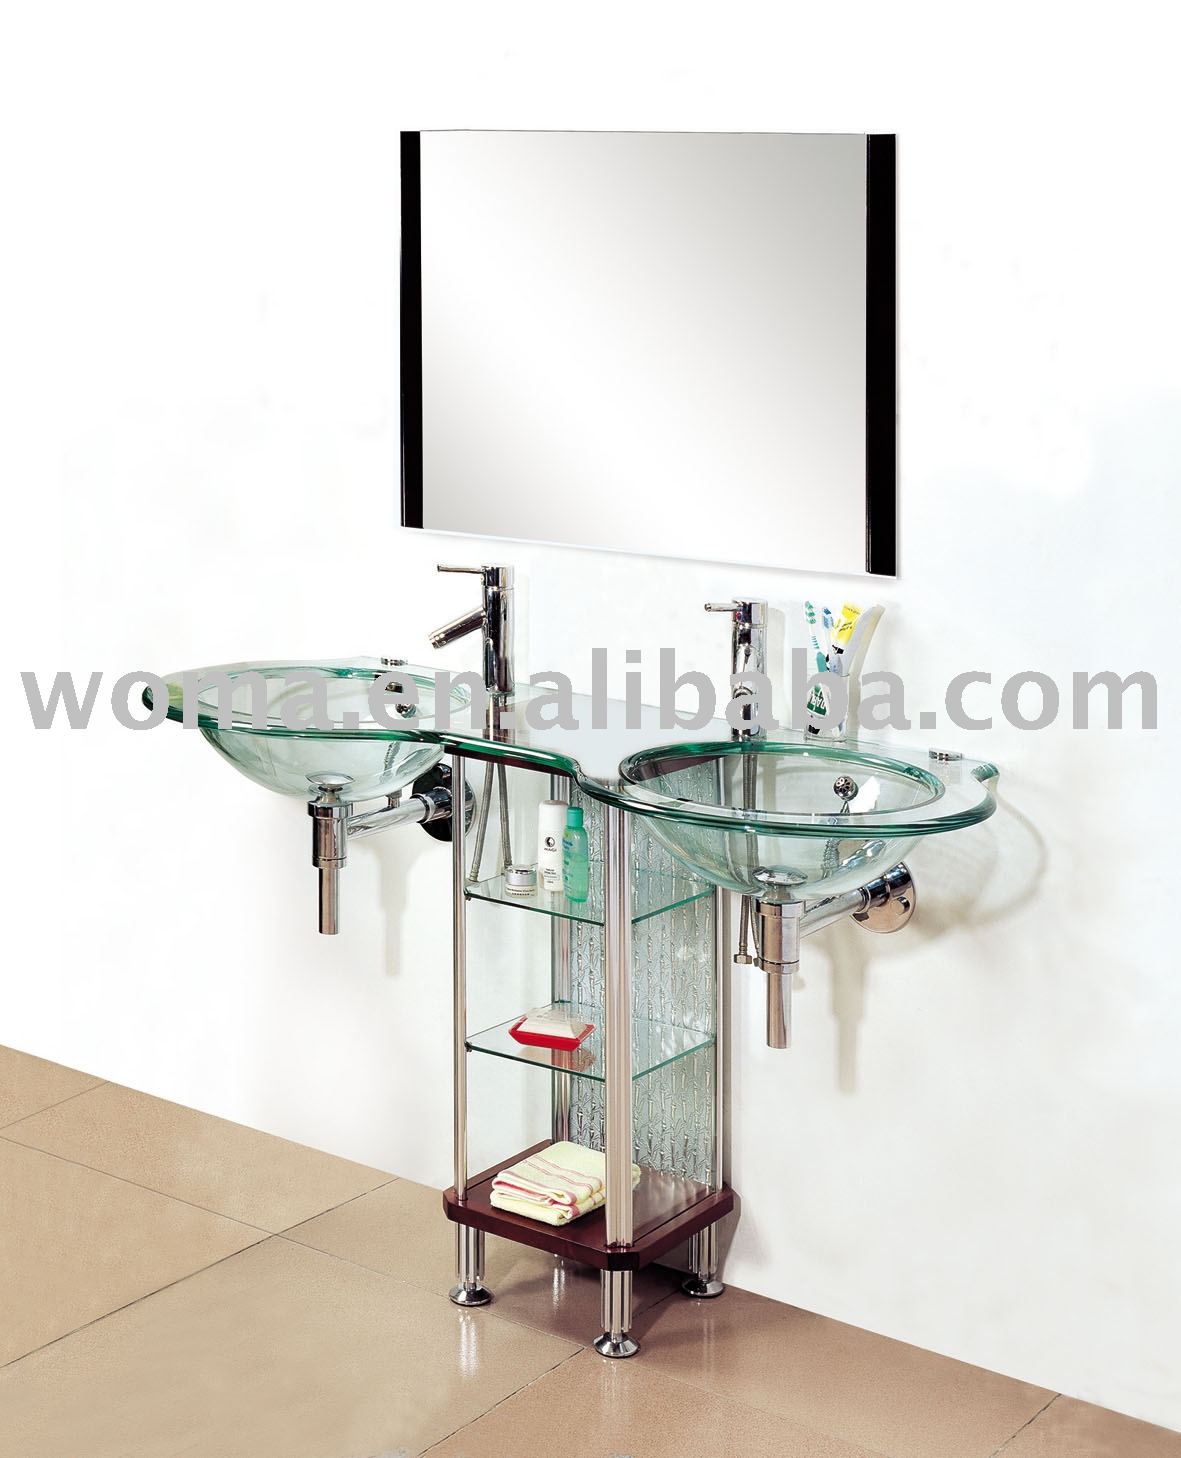 BATHROOM GLASS WALL CABINET - COMPARE PRICES, REVIEWS AND BUY AT